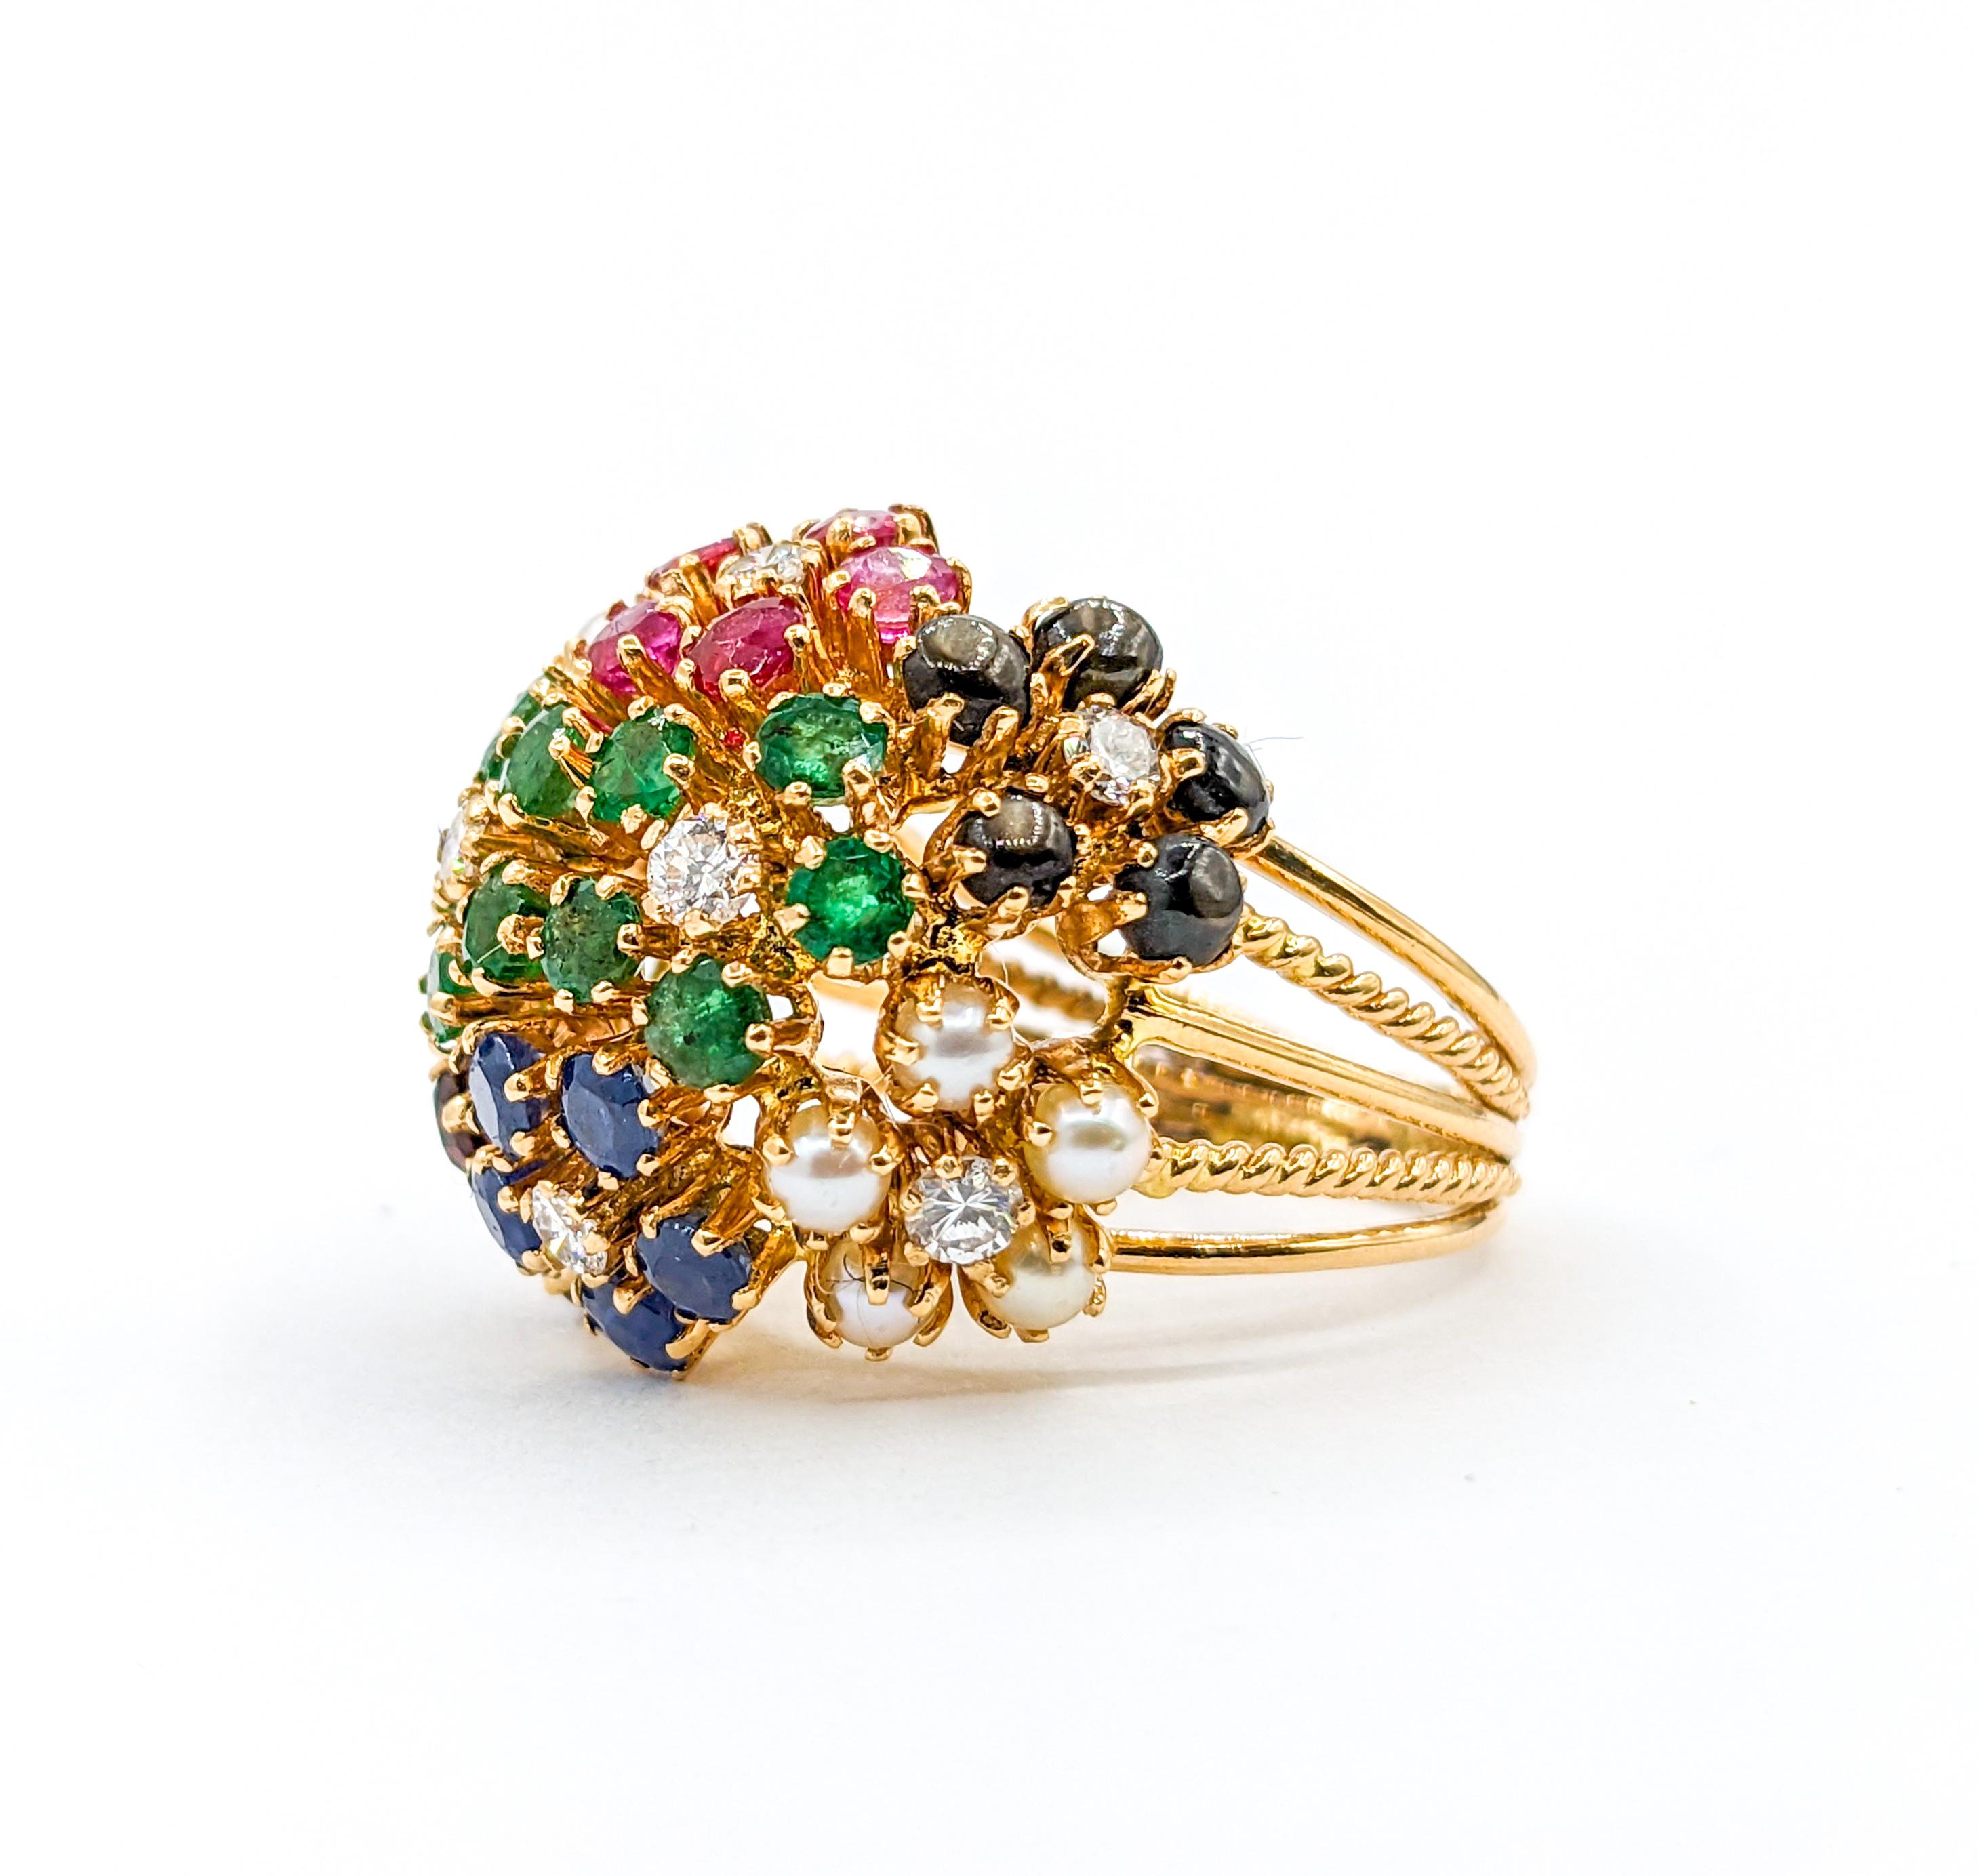 Whimsical Flower Cluster Ring with Diamonds, Ruby, Pearls & Emeralds For Sale 2